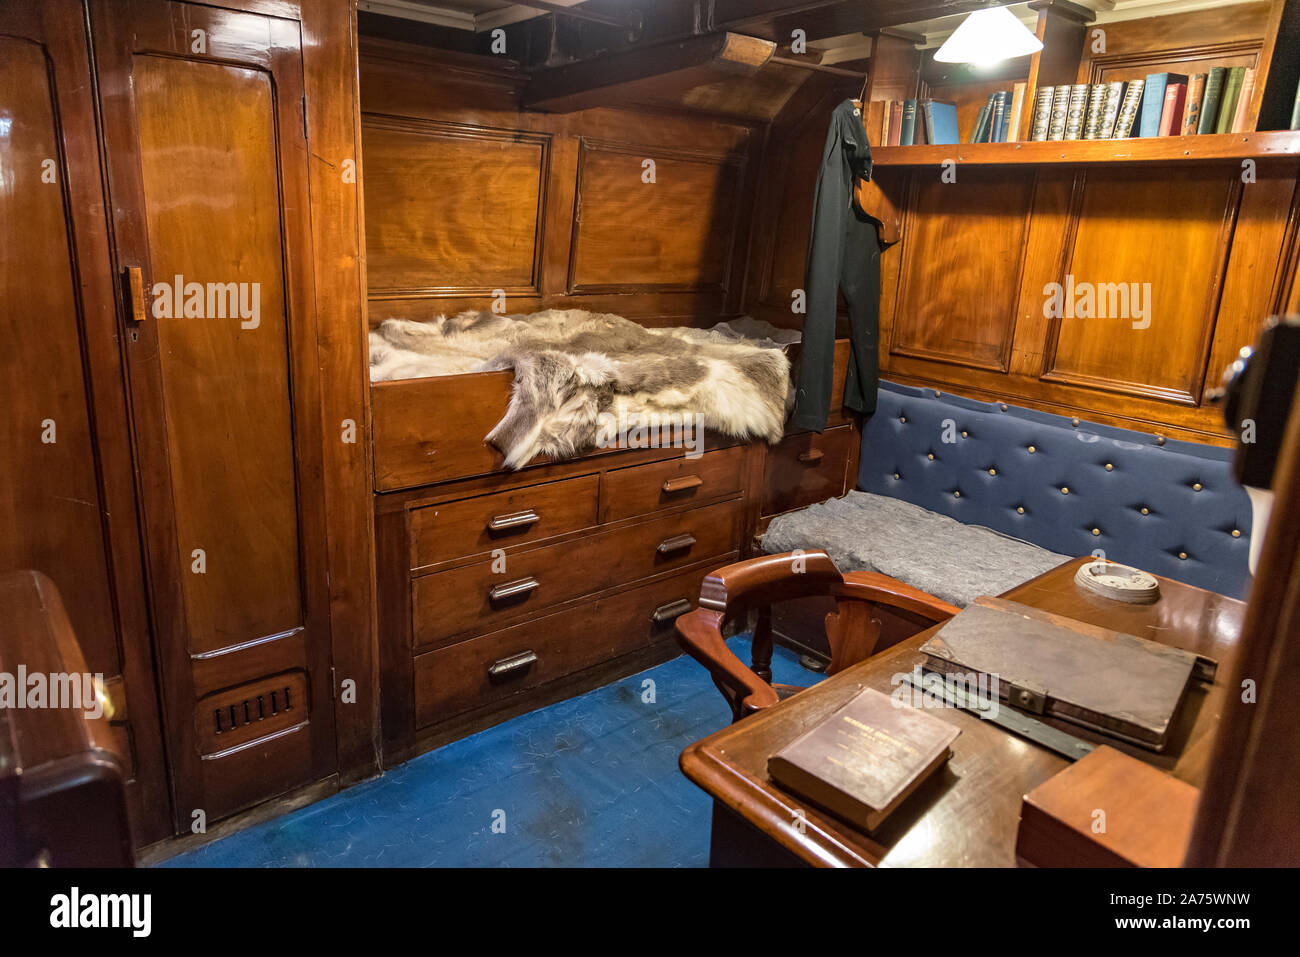 Aboard the Antarctica exploration ship the Discovery in Dundee. Scotts's cabin. Stock Photo